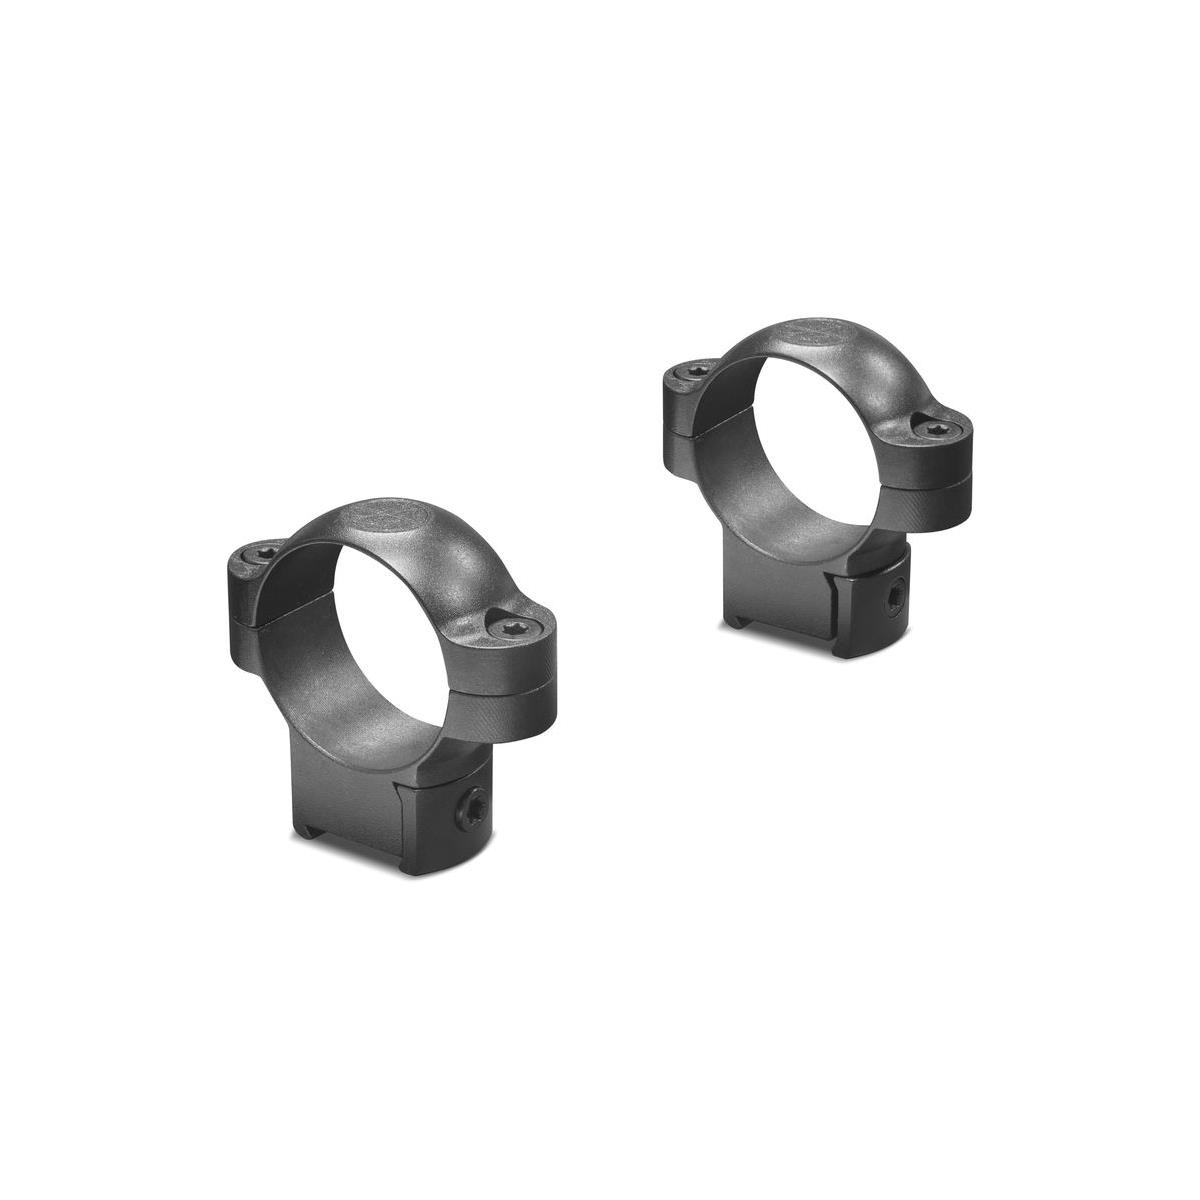 Image of Leupold 30mm Riflescope Ringmounts Compatible with CZ 527 Rifles